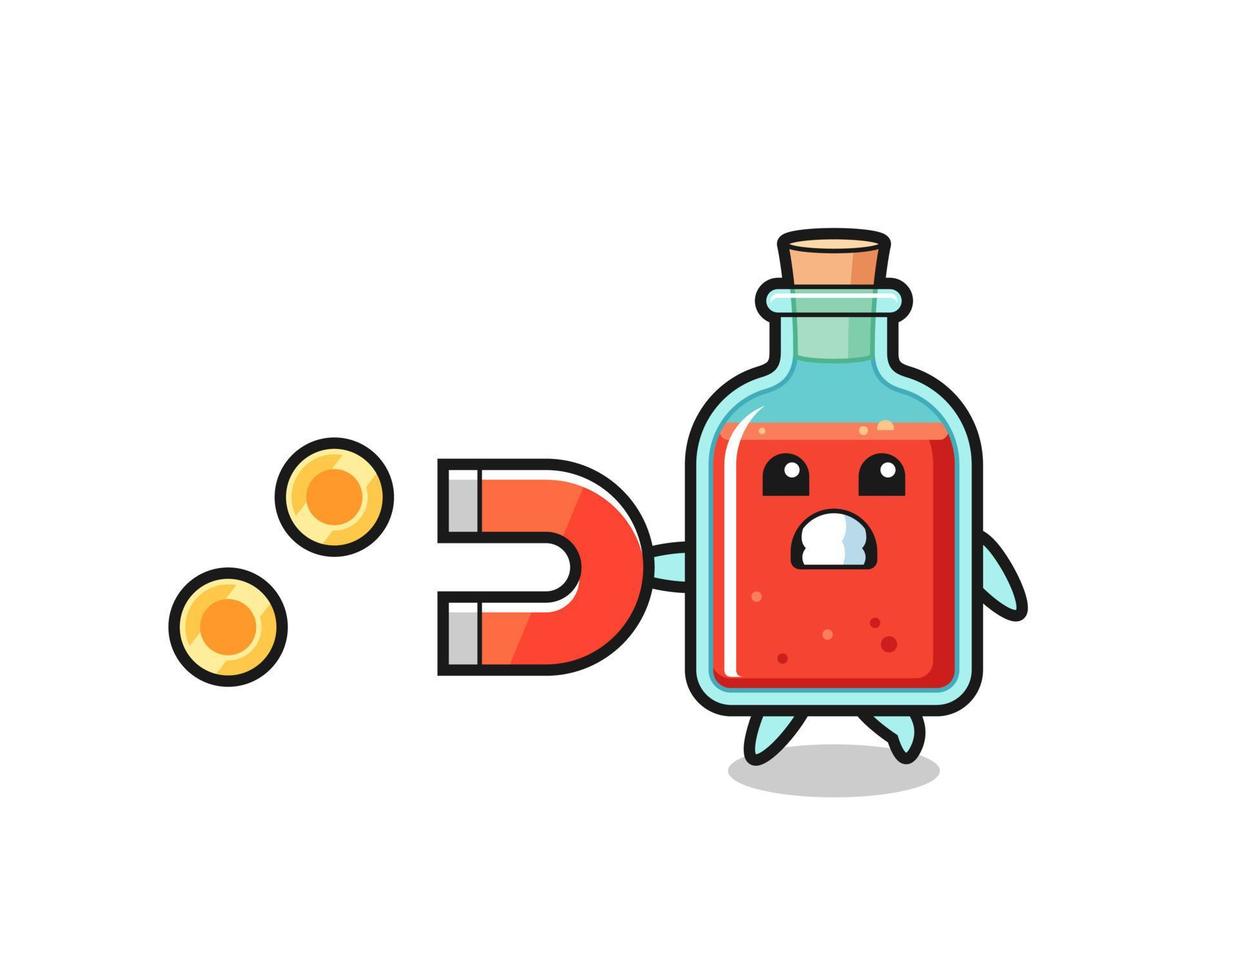 the character of square poison bottle hold a magnet to catch the gold coins vector